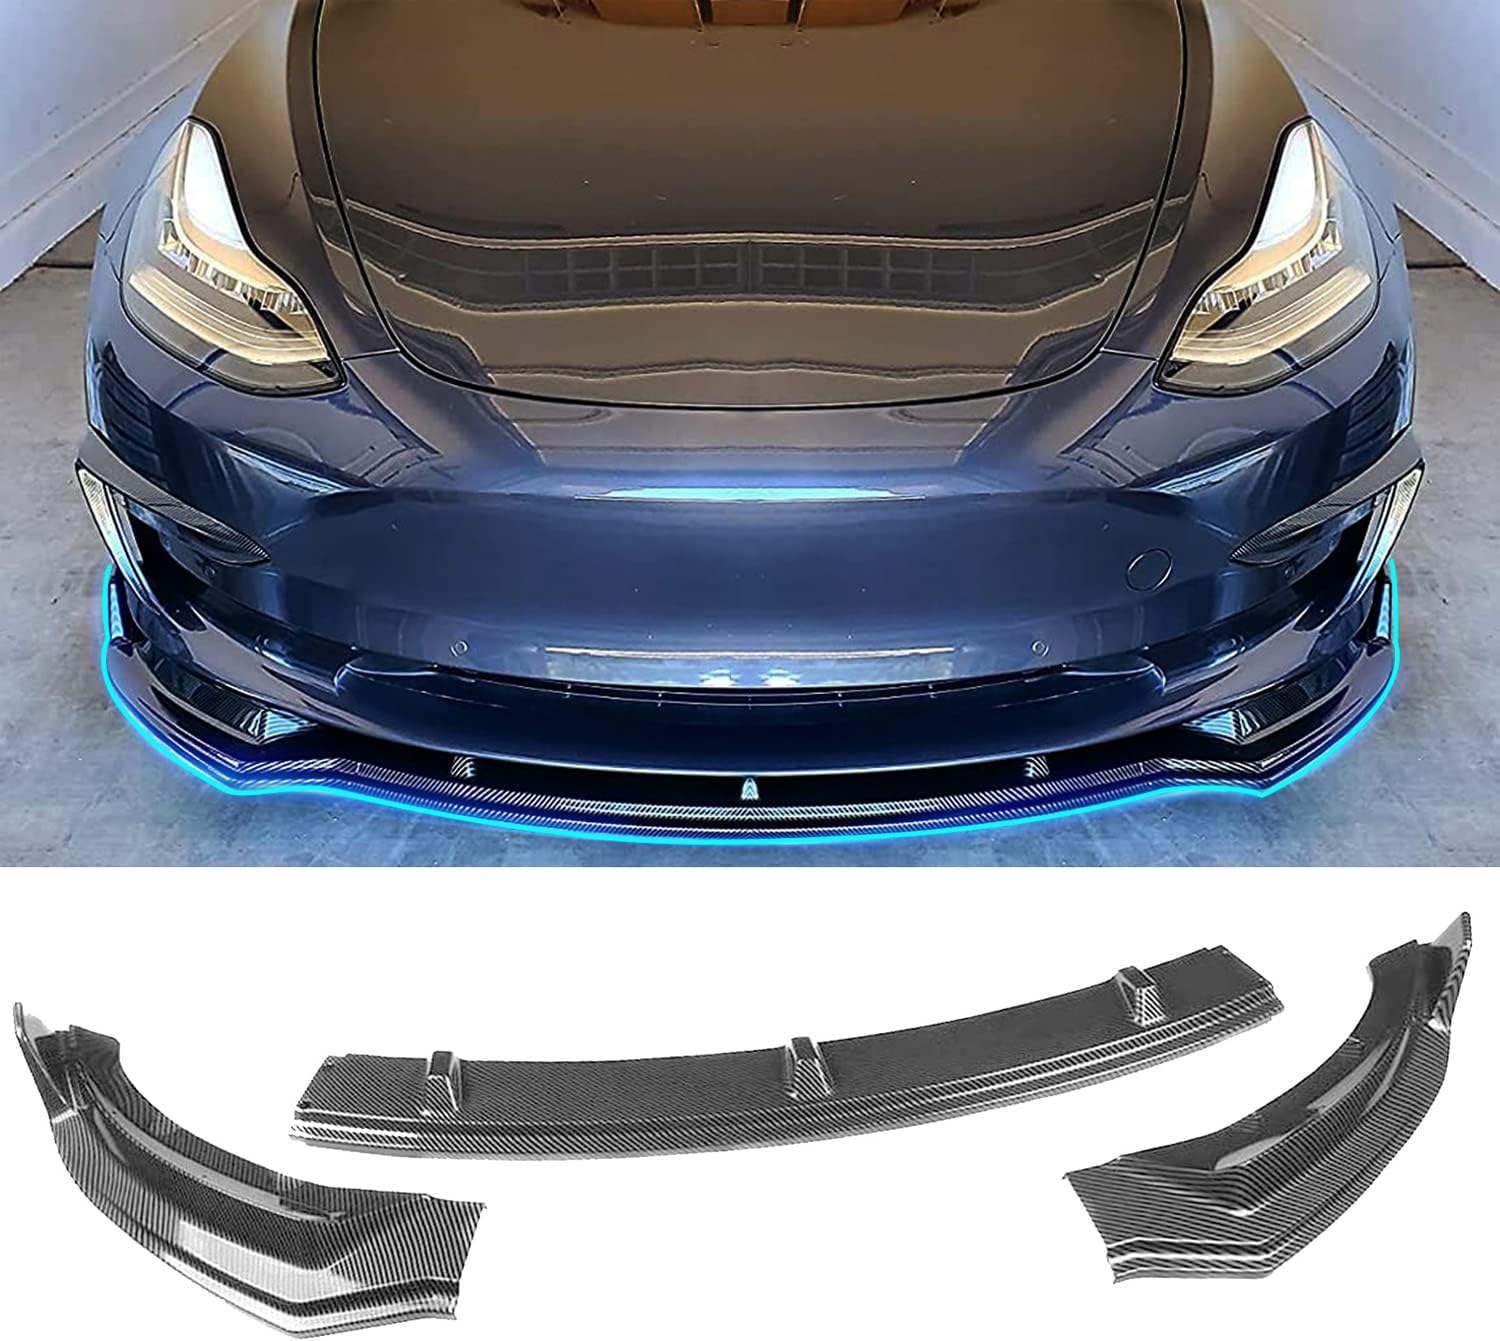 The Real Cost of Replacing a Tesla Bumper